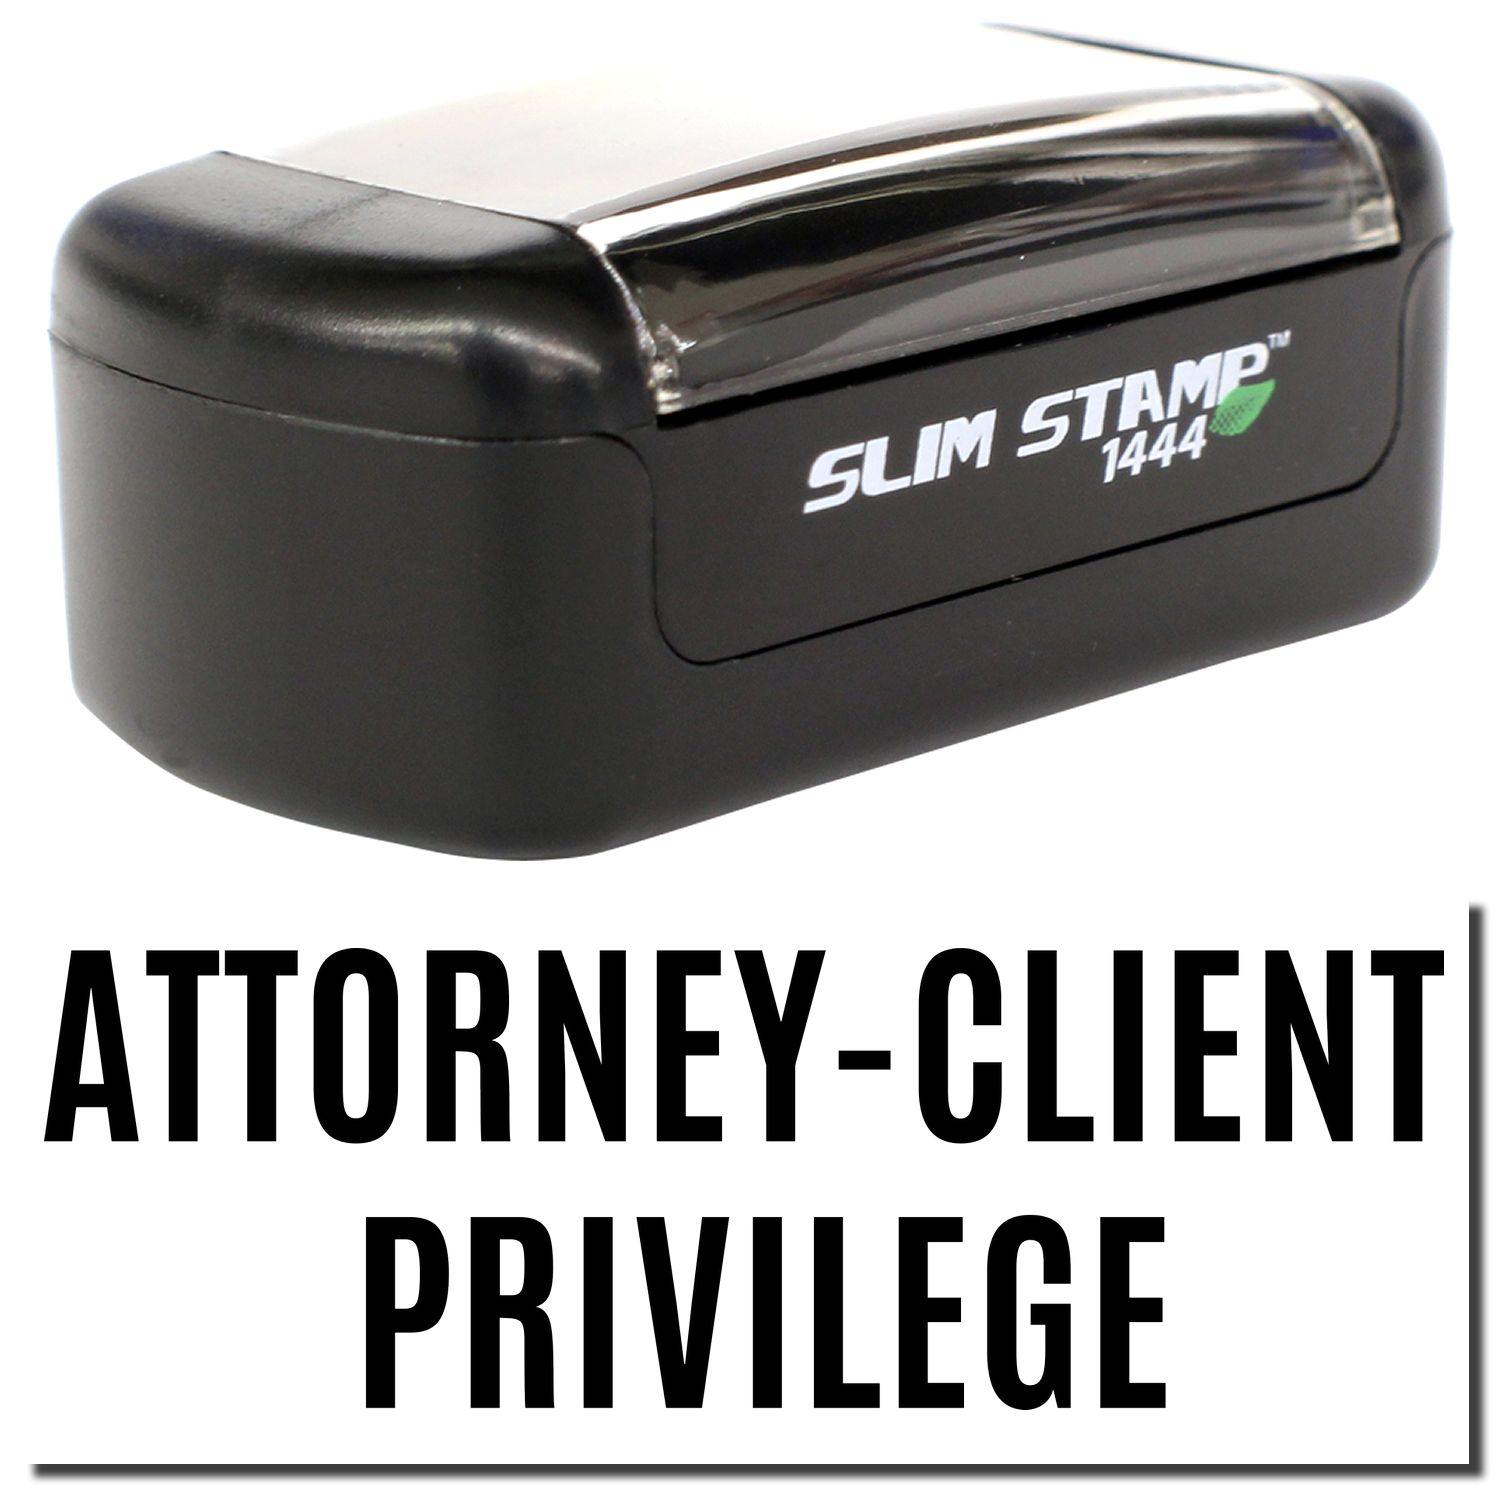 A stock office pre-inked stamp with a stamped image showing how the text "ATTORNEY-CLIENT PRIVILEGE" is displayed after stamping.